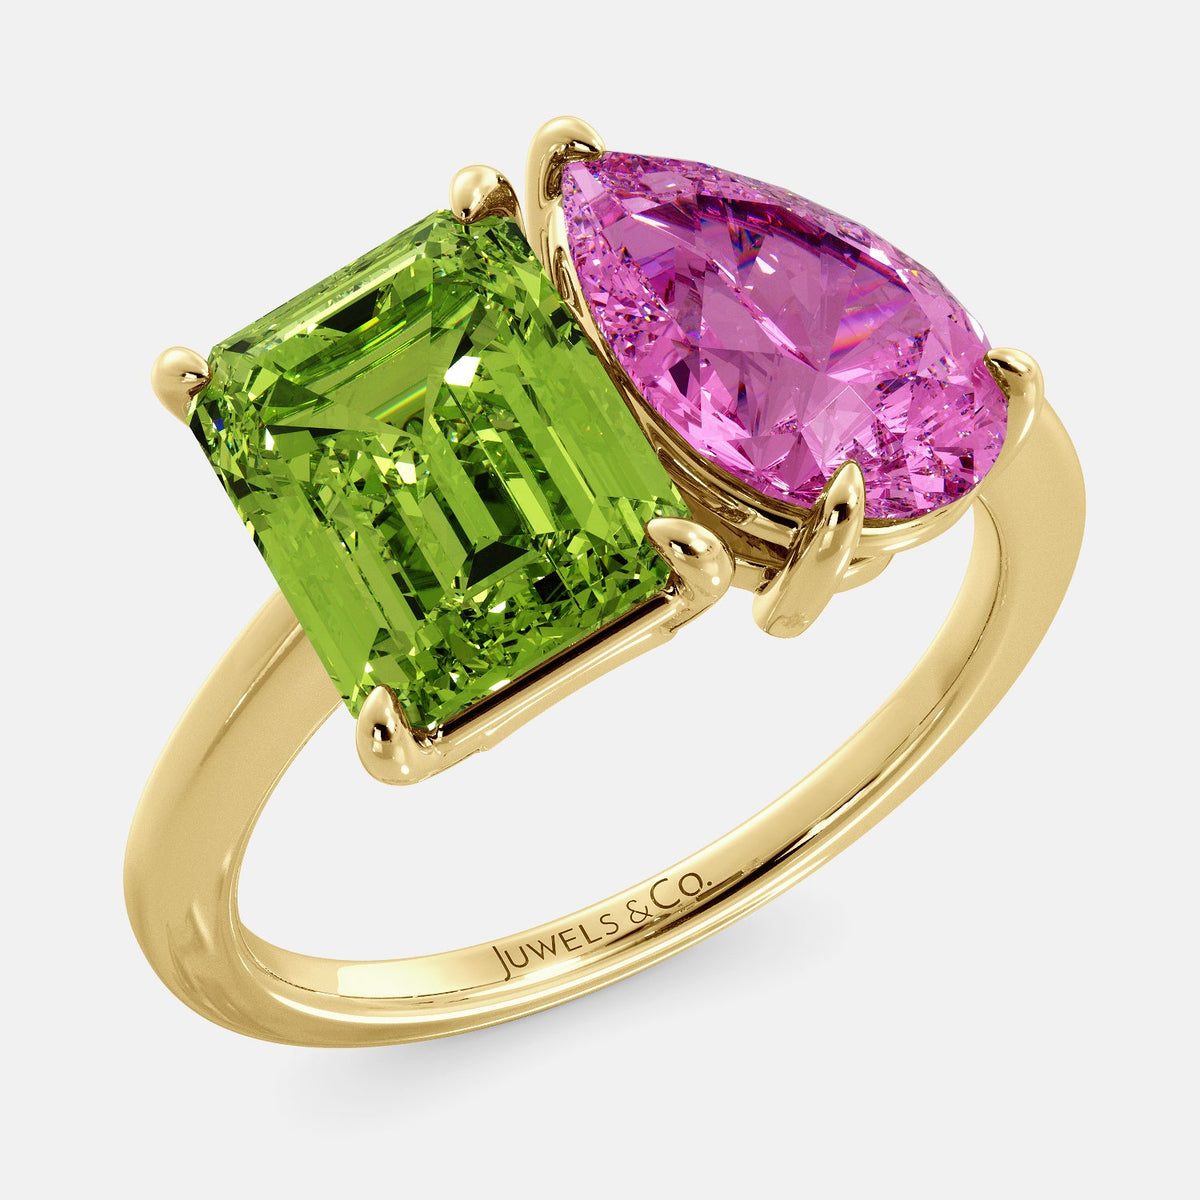 A toi et moi ring with an emerald-cut Green Peridot and a pear-cut gemstone. The emerald-cut morganite is set on the left of the ring, and the pear-cut gemstone is set on the right. The ring is made of recycled yellow gold and has a simple, elegant design. The pear-cut gemstone can be customized. **Here are some additional details about the image:** * The emerald-cut white Green Peridot is a birthstone for August. * The pear-cut gemstone can be customized to any stone of your choice.